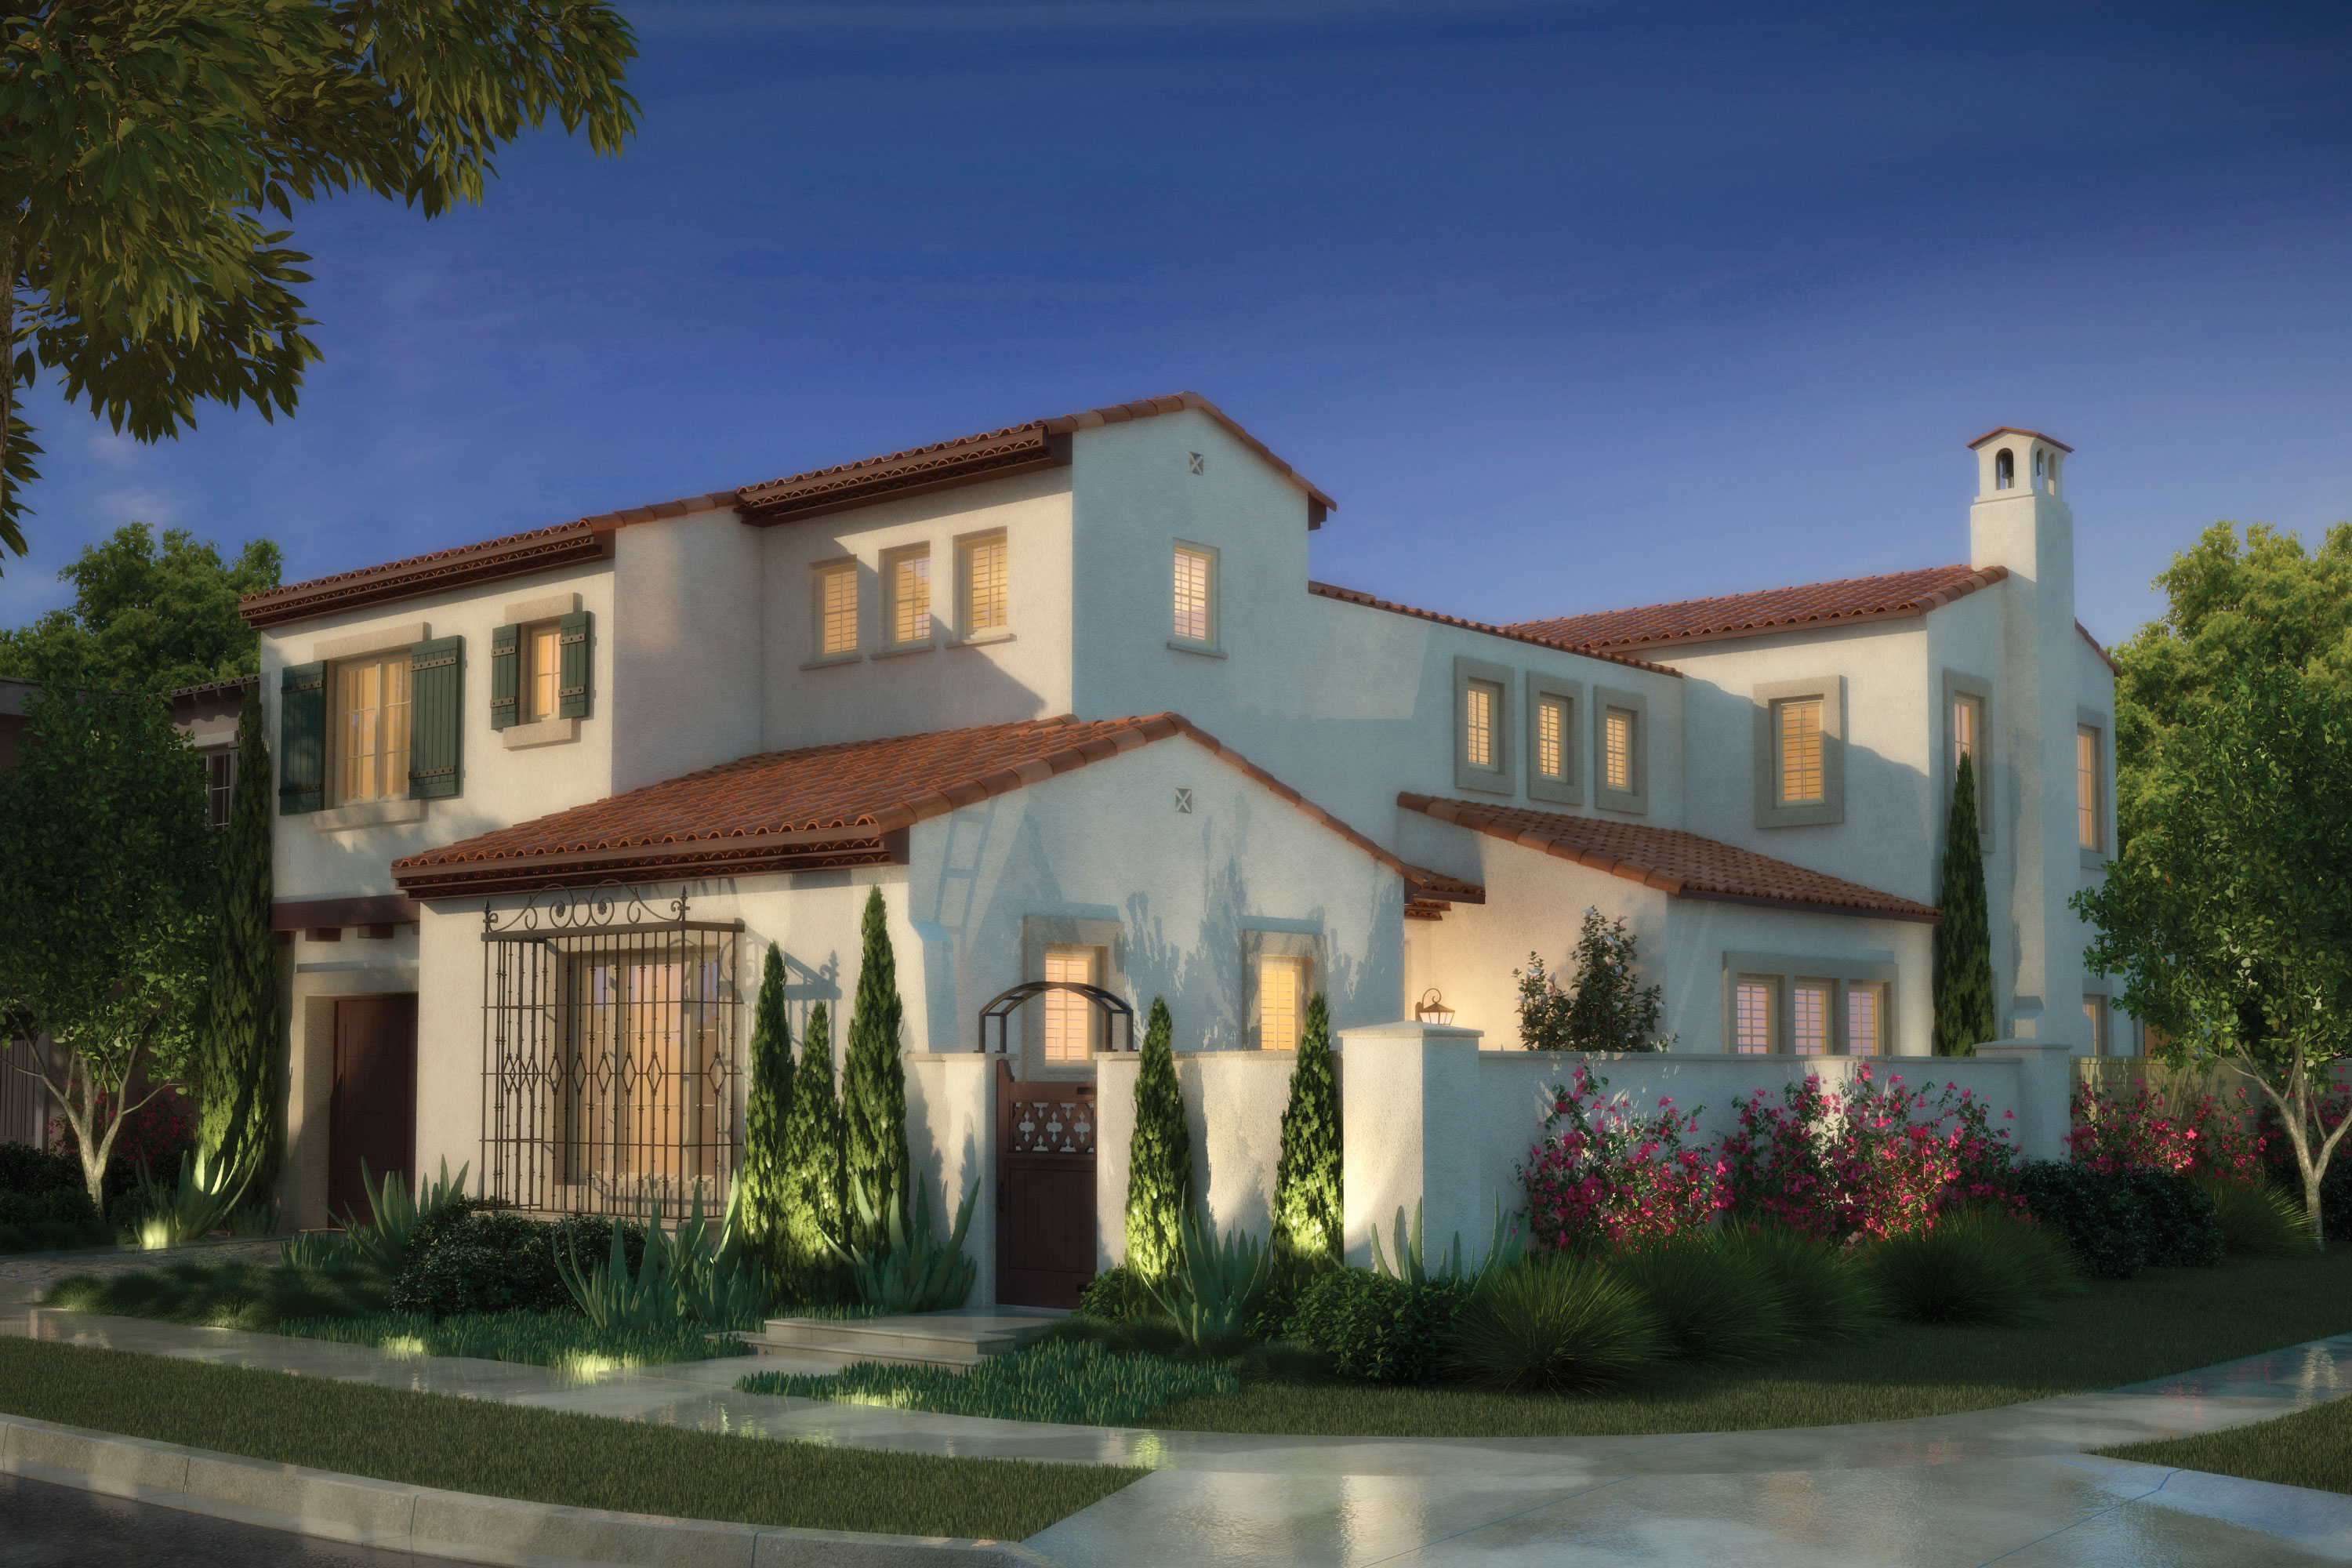 At Saviero at Orchard Hills, homes stretch from approximately 3,795 to 4,050 square feet with up to five bedrooms, 5.5 baths and three-car garages.